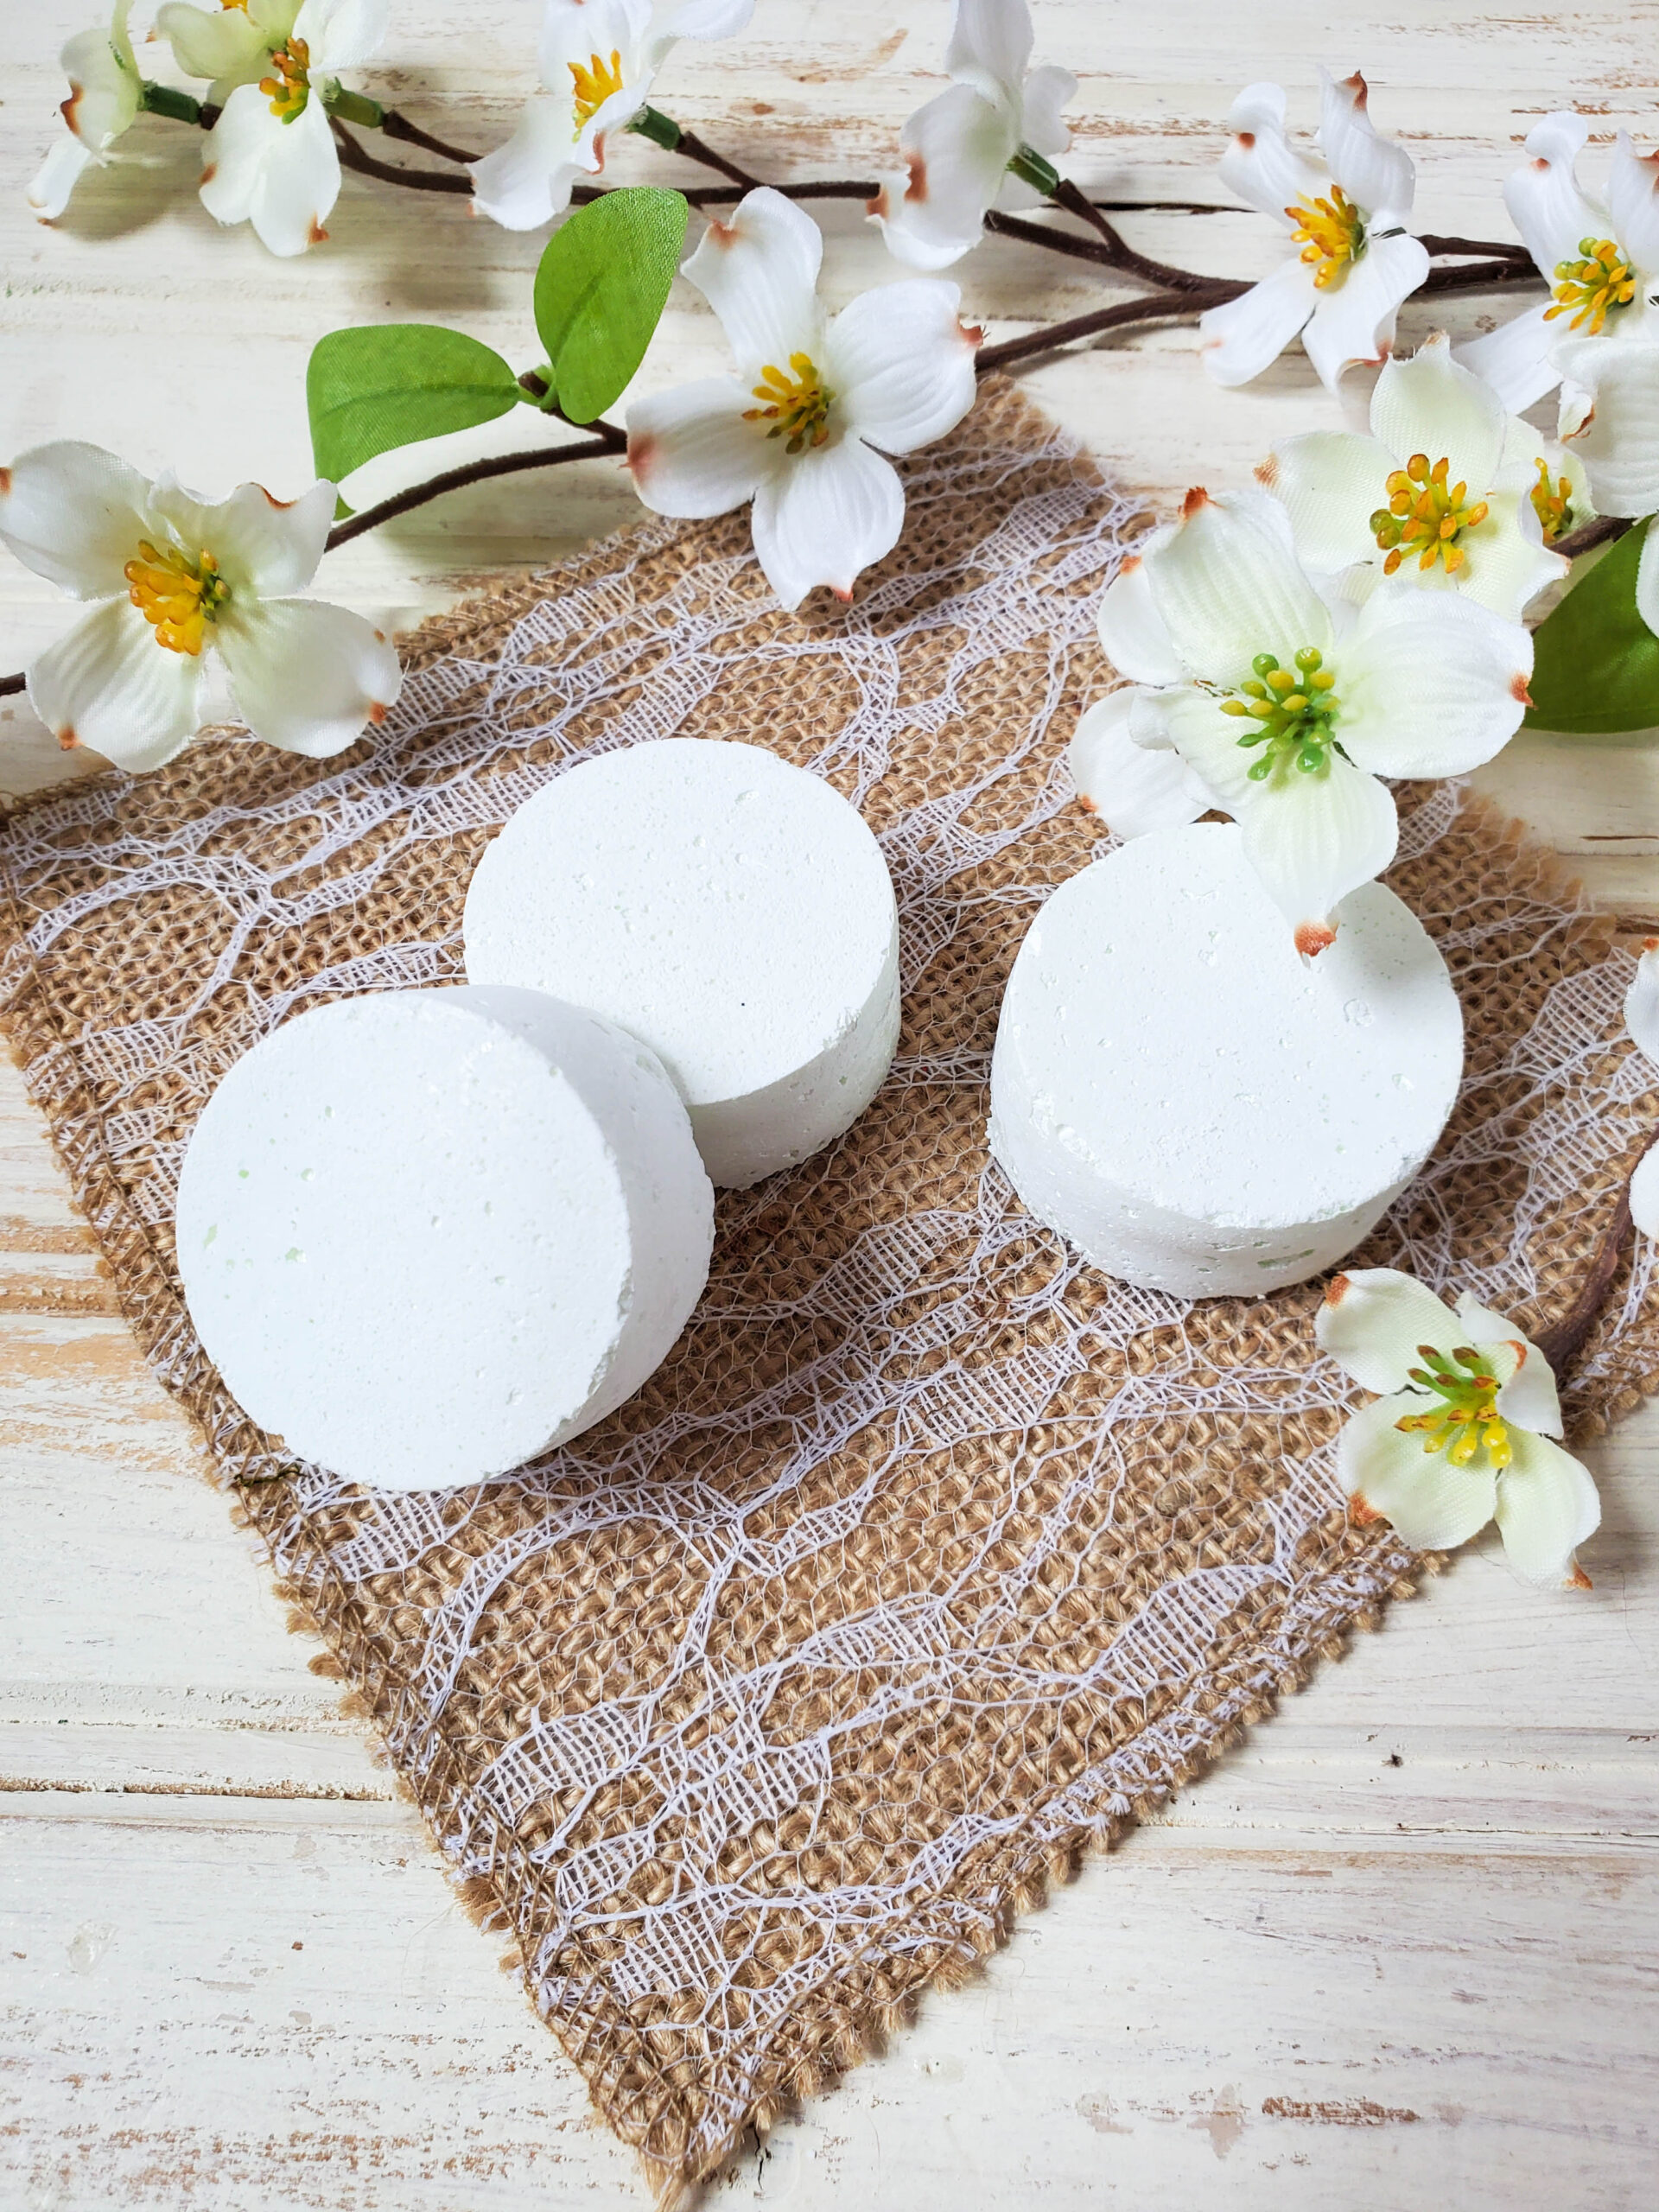 These diy shower steamers are scented with lemongrass essential oil, which is uplifting and can help improve your mental clarity.